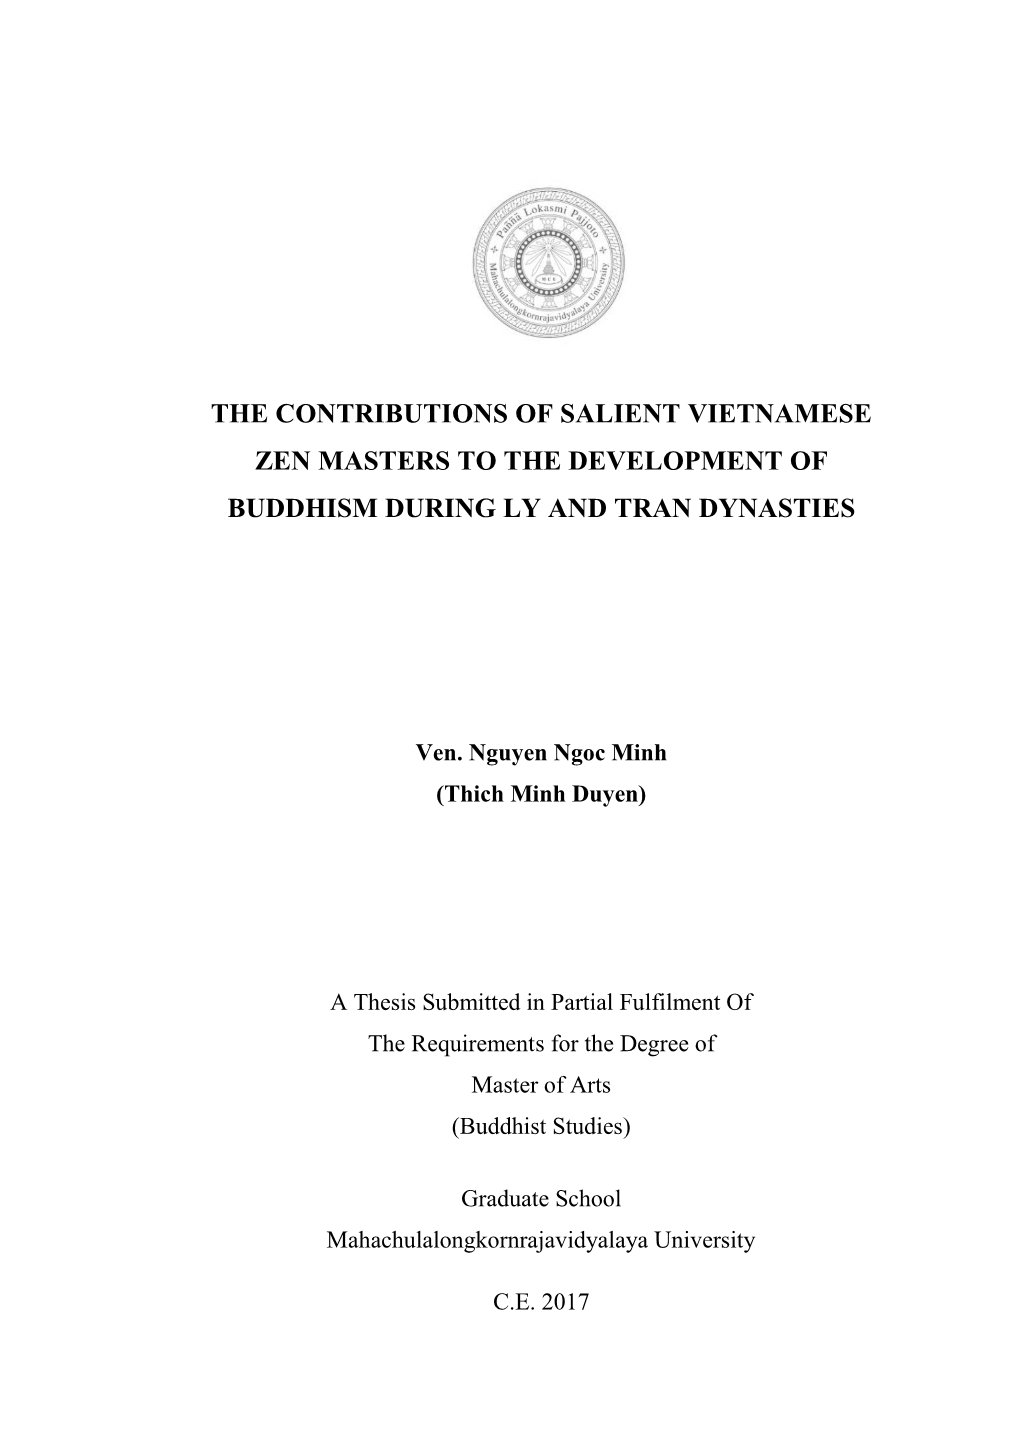 The Contributions of Salient Vietnamese Zen Masters to the Development of Buddhism During Ly and Tran Dynasties